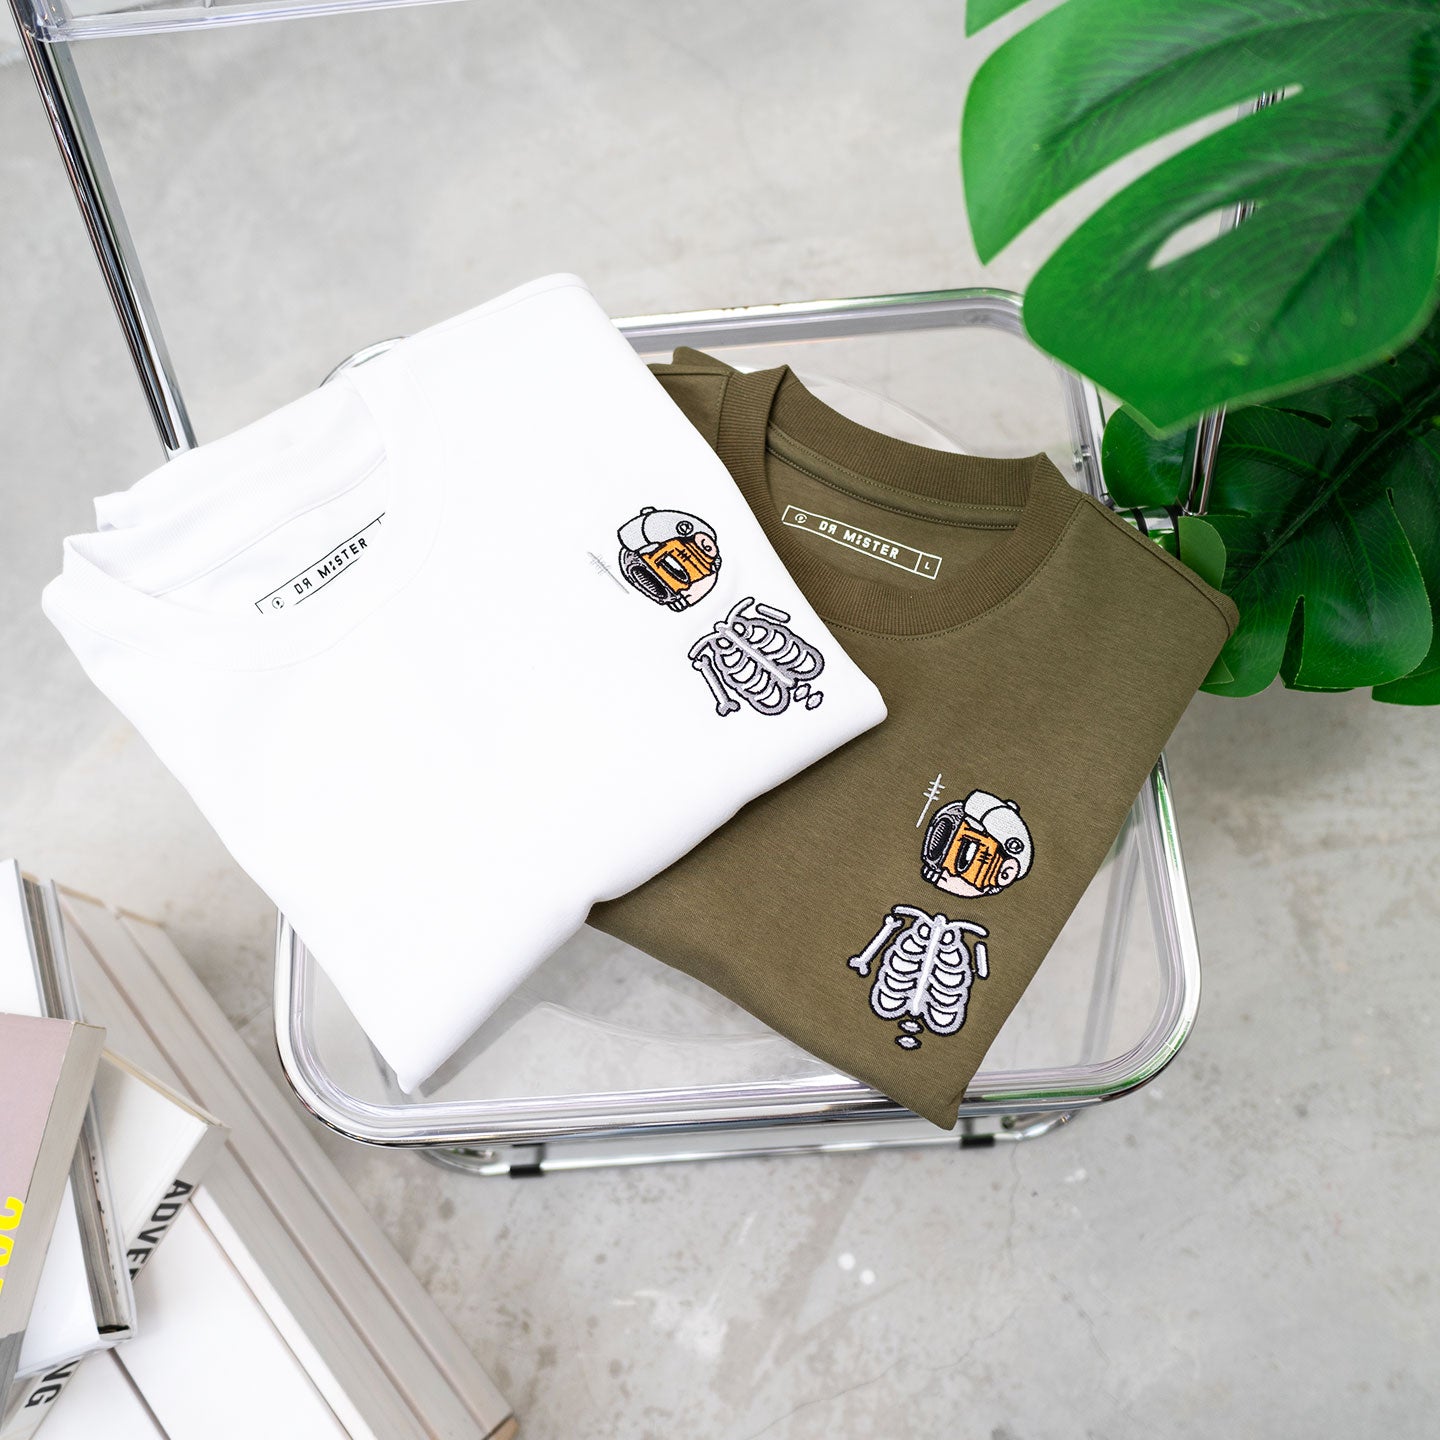 Nothing Matters Heavy Broad Tee - Olive Green